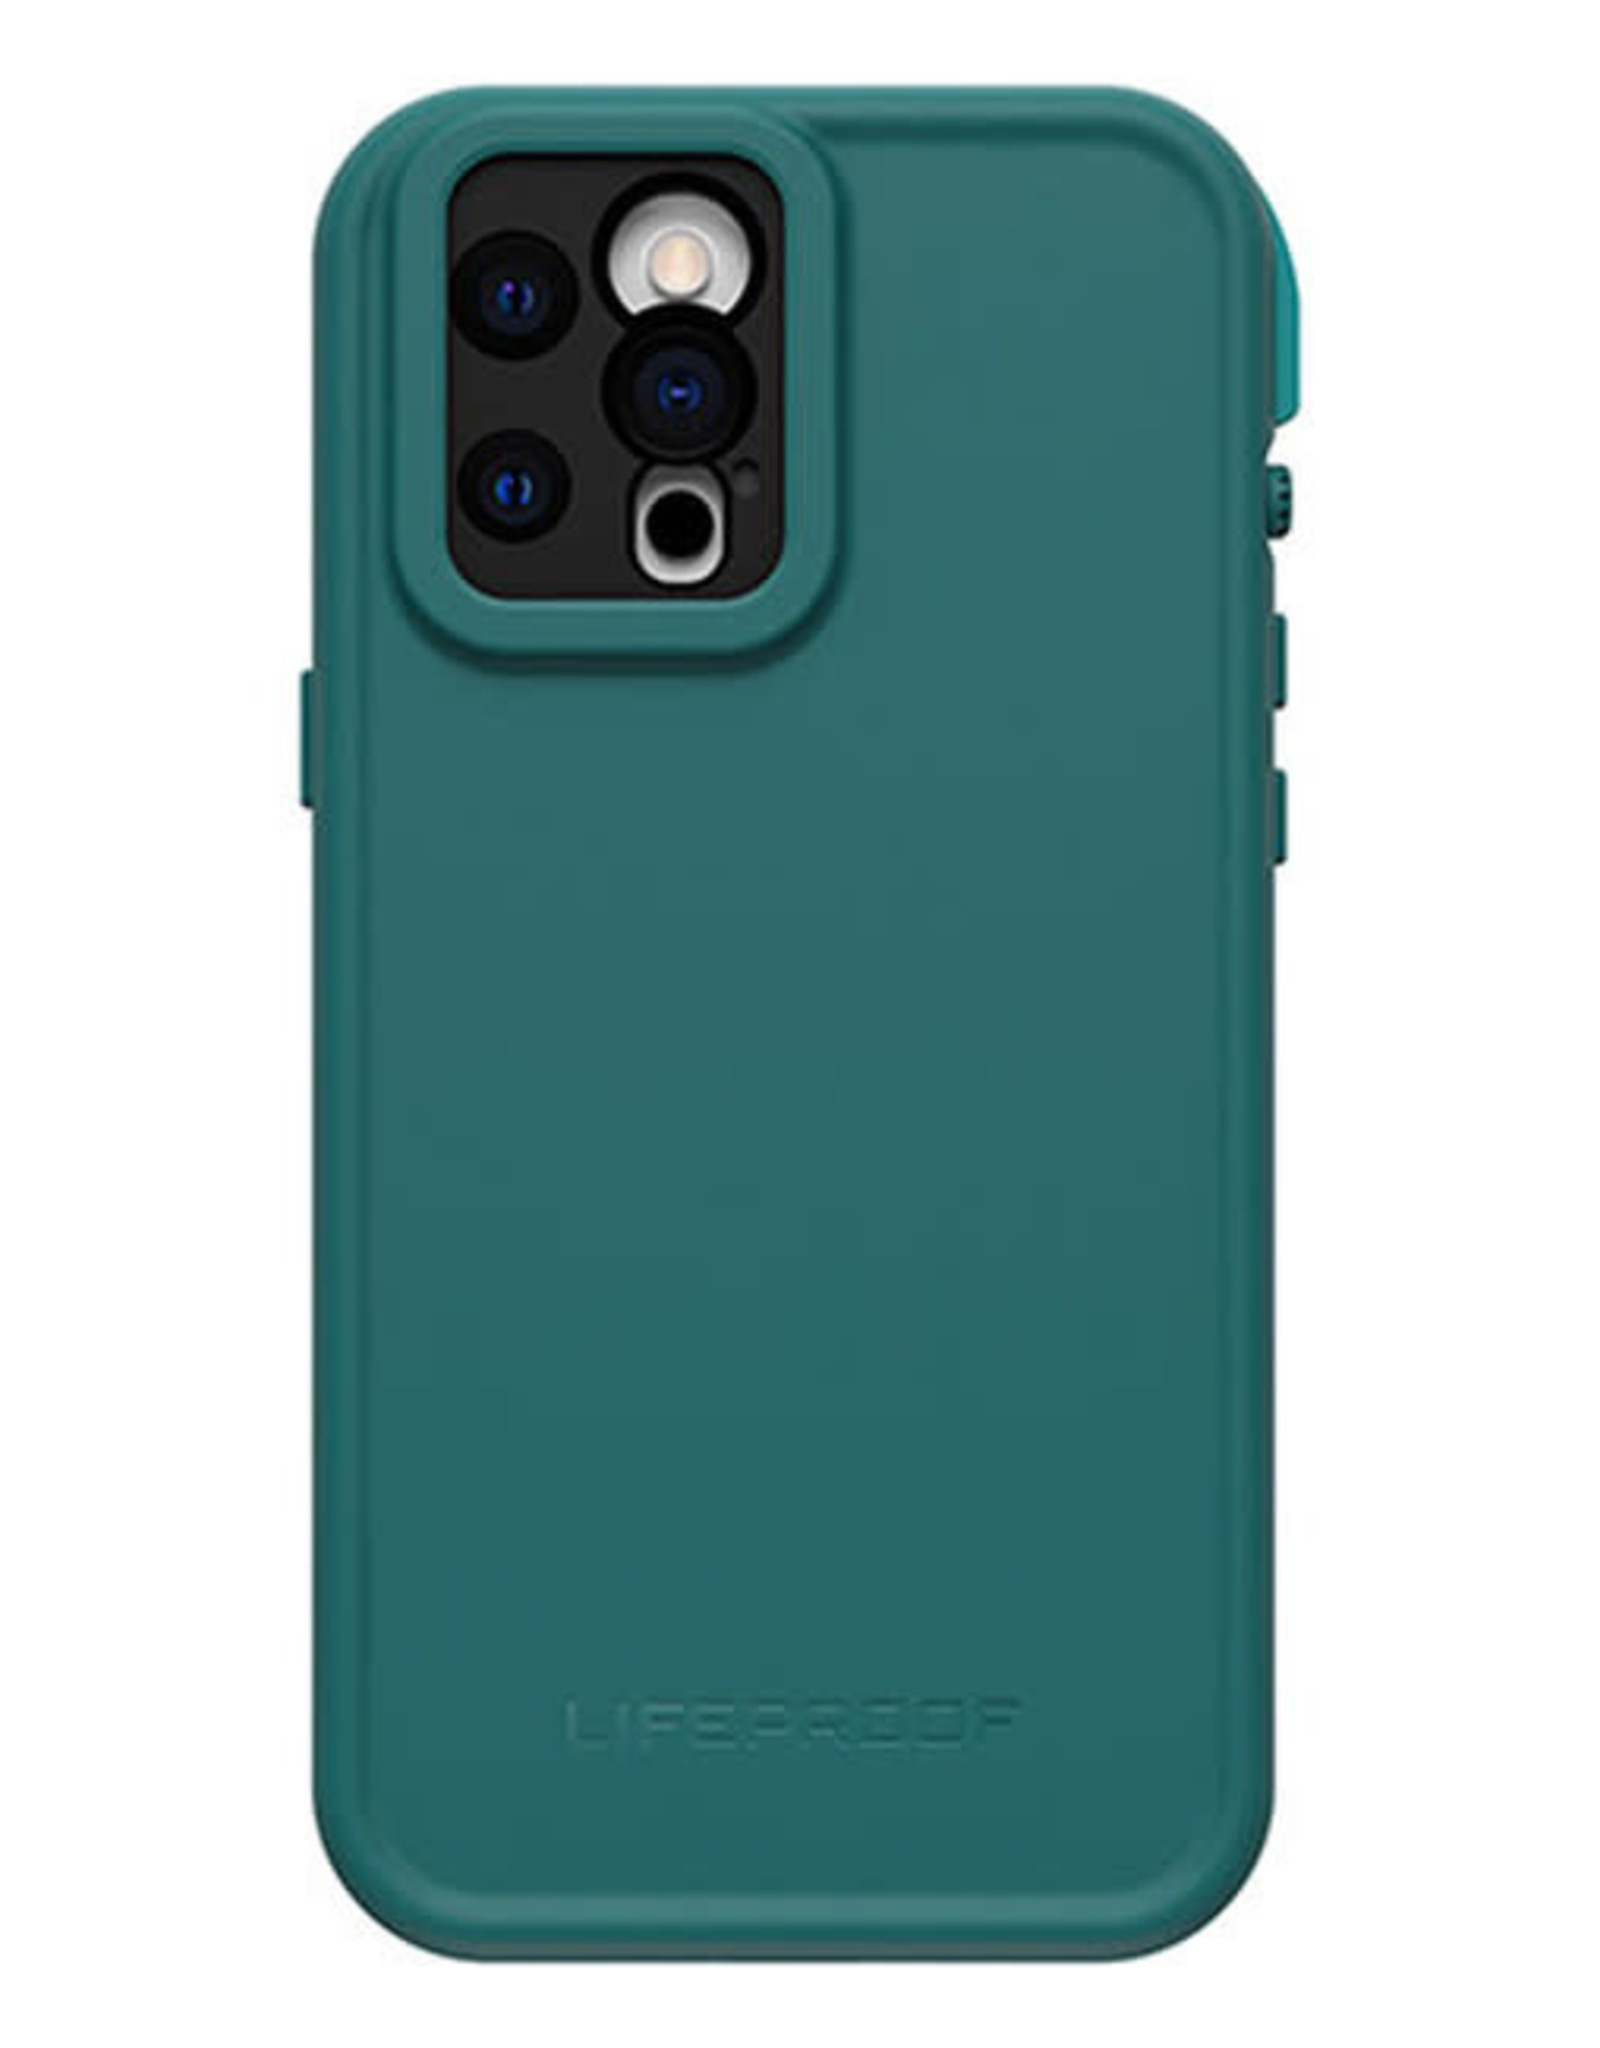 Lifeproof LifeProof - Fre Waterproof Case Free Diver (Blue) for iPhone 12 Pro Max